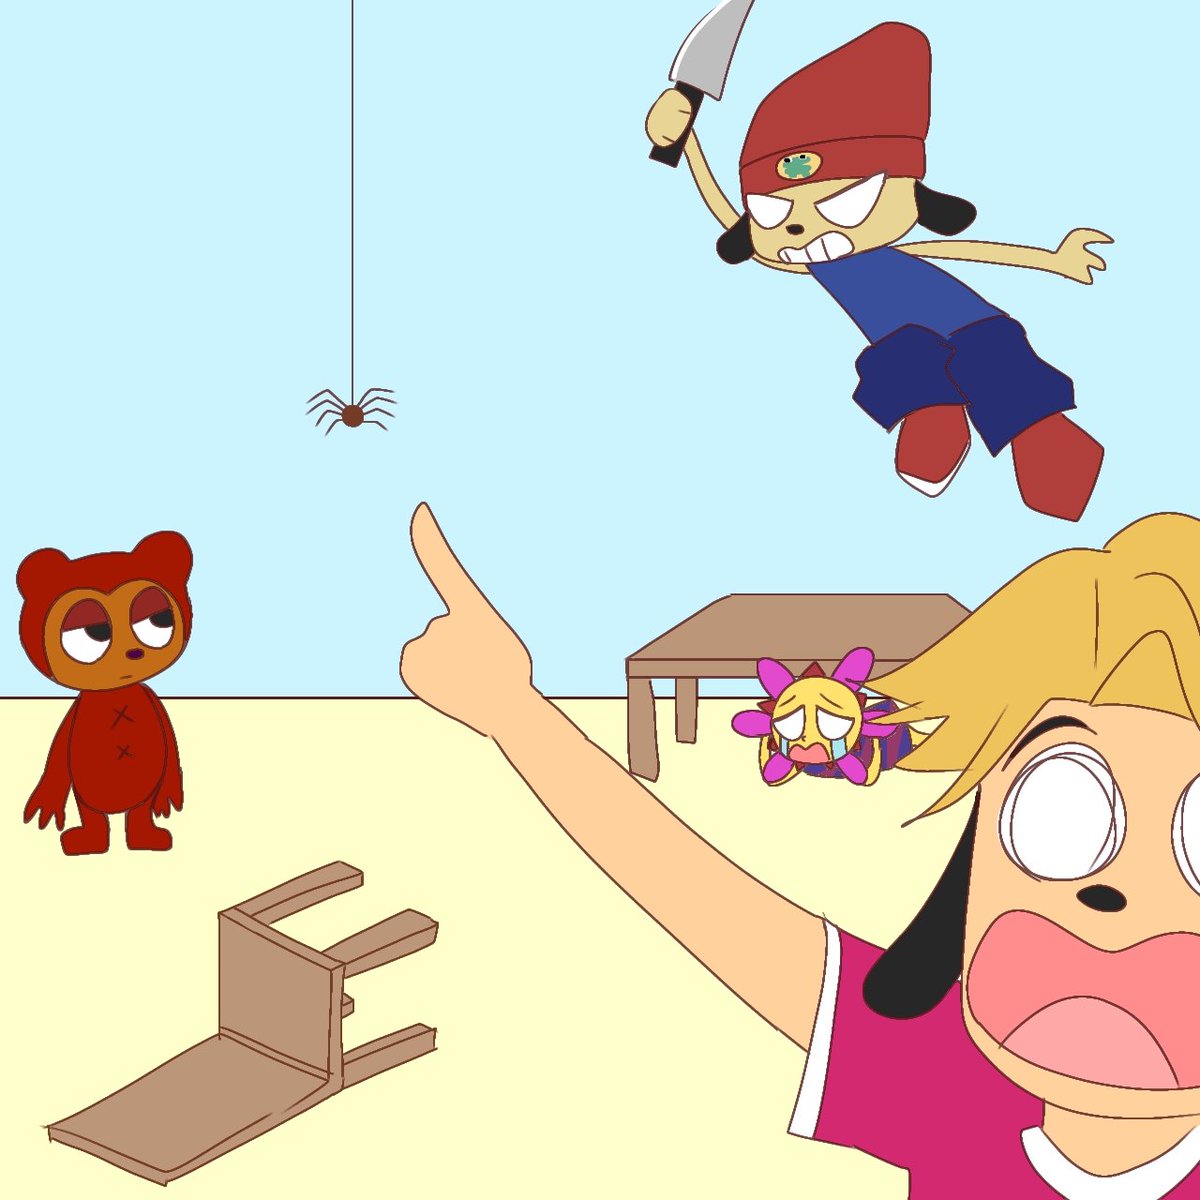 parappa fights a spider
#parappatherapper
#parappatherapperfanart
#parappa